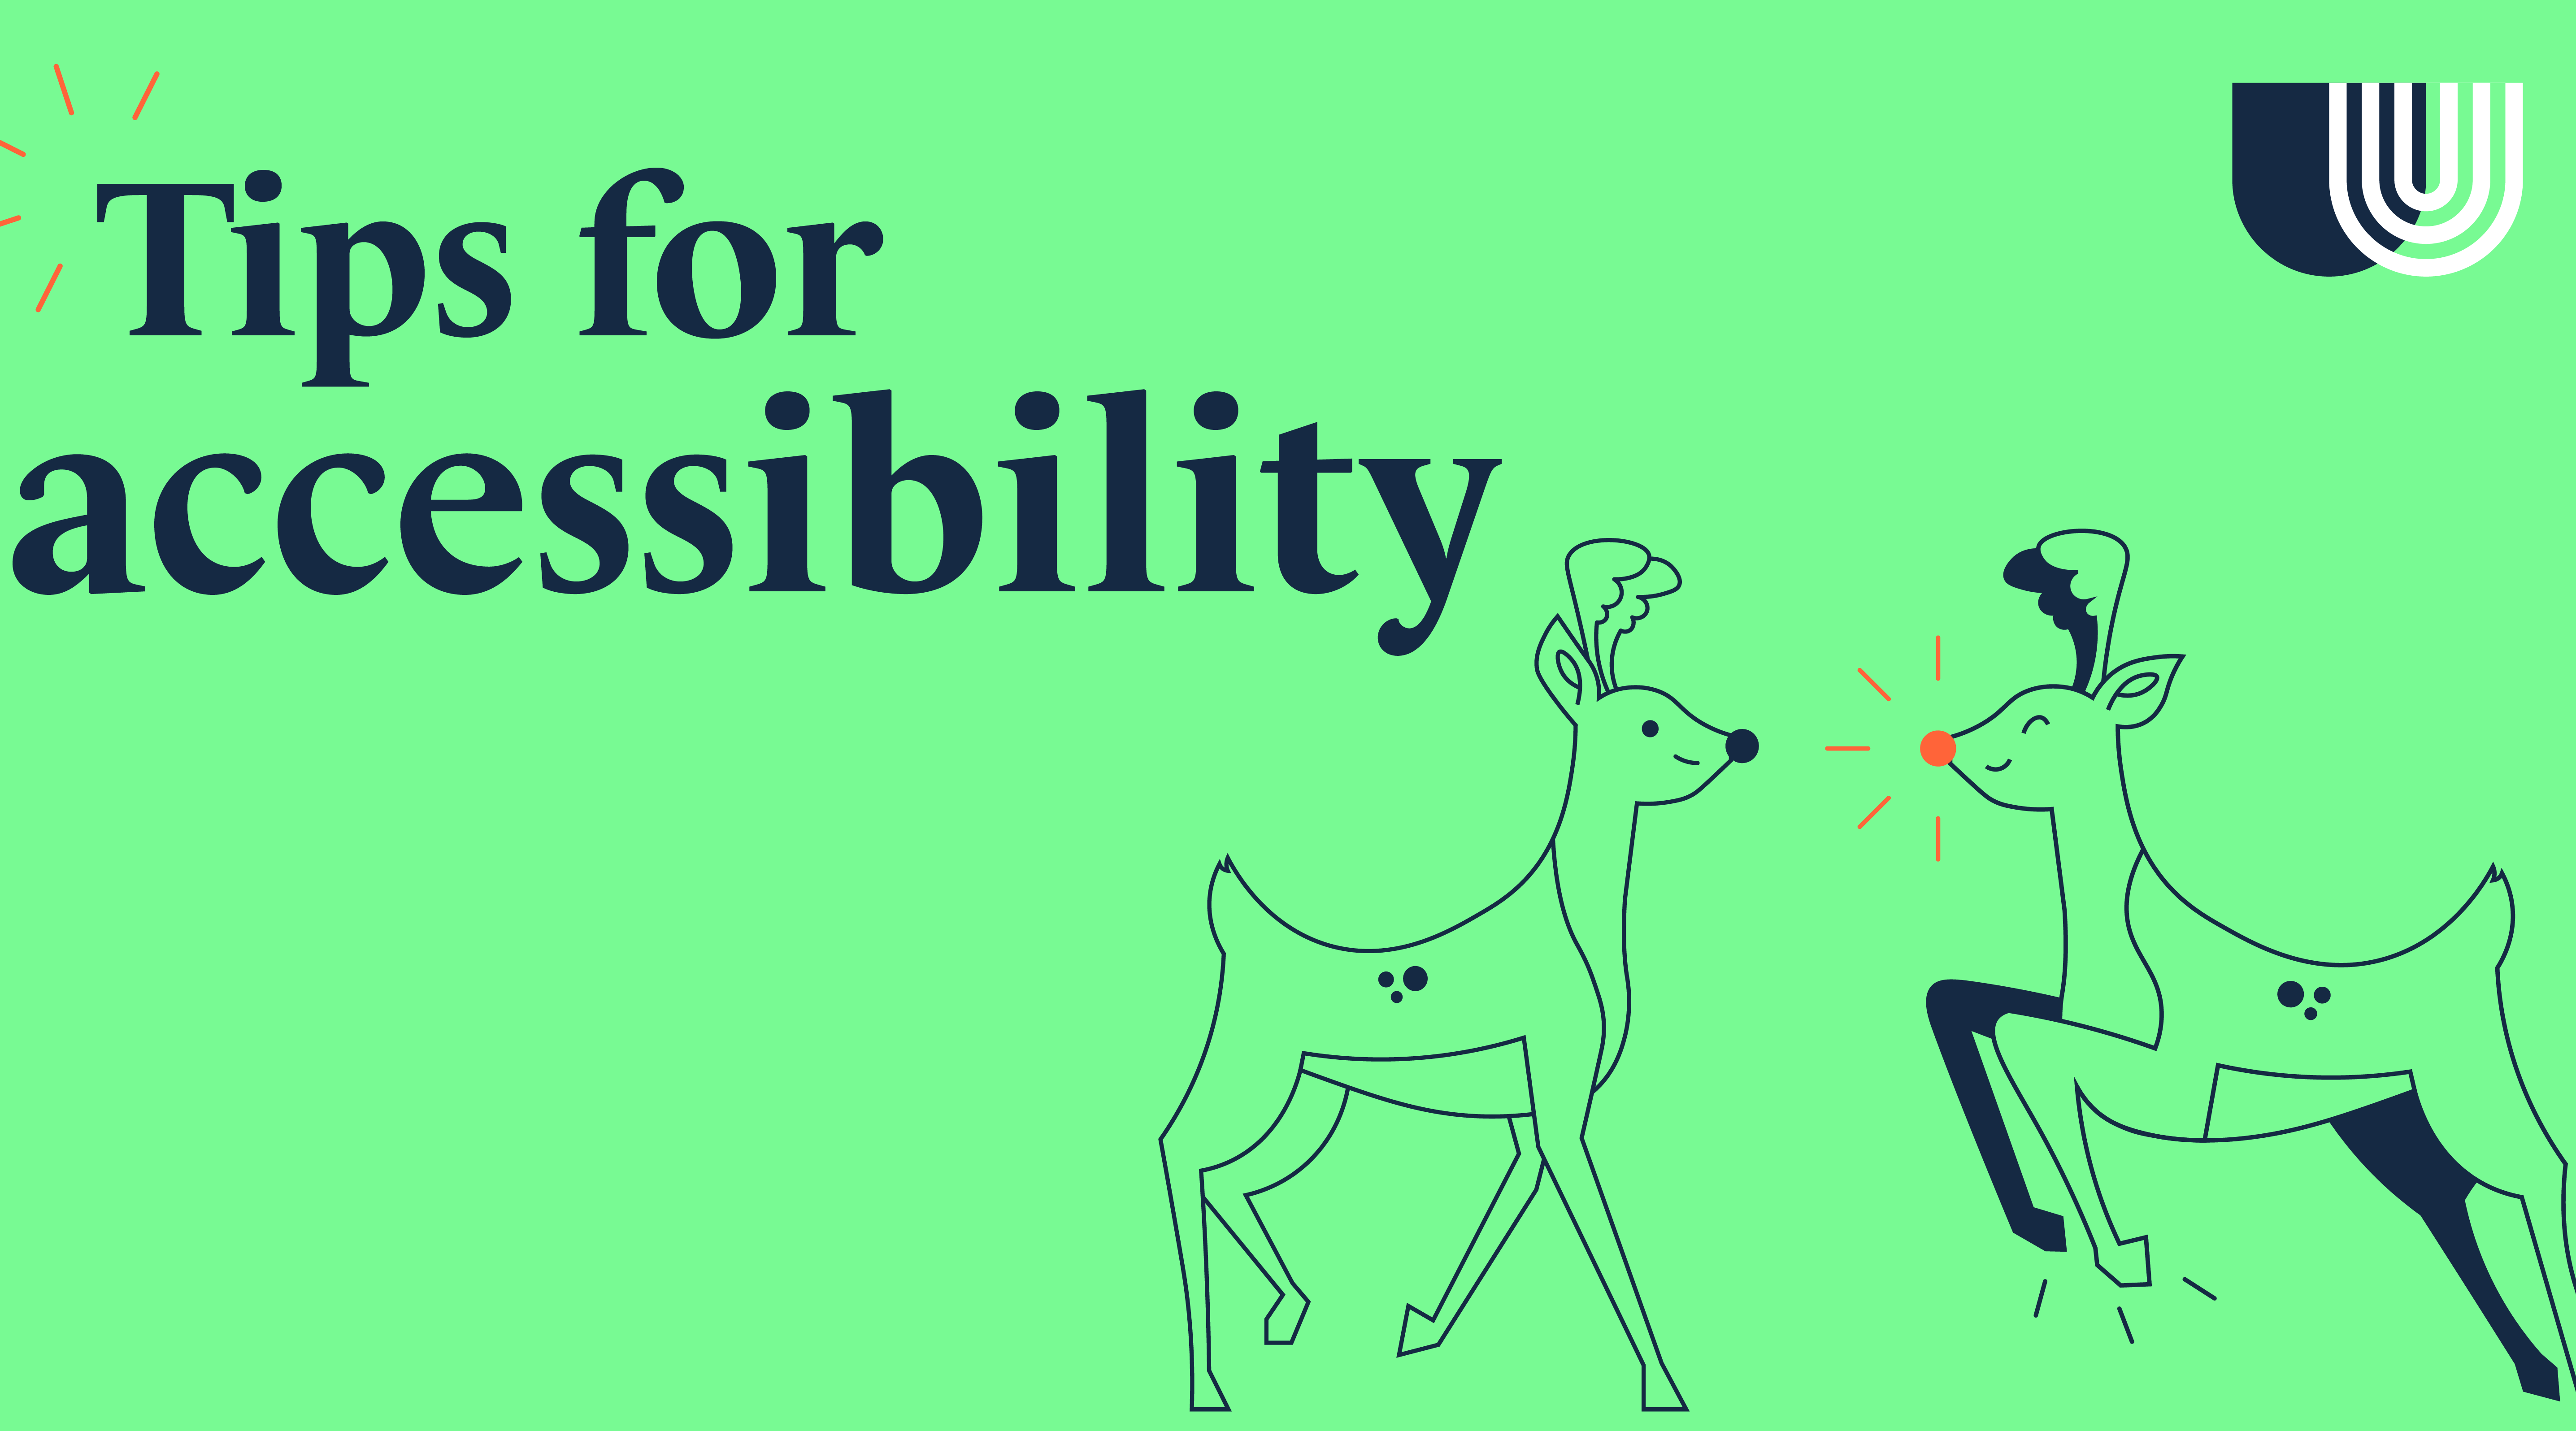 Tips for accessibility